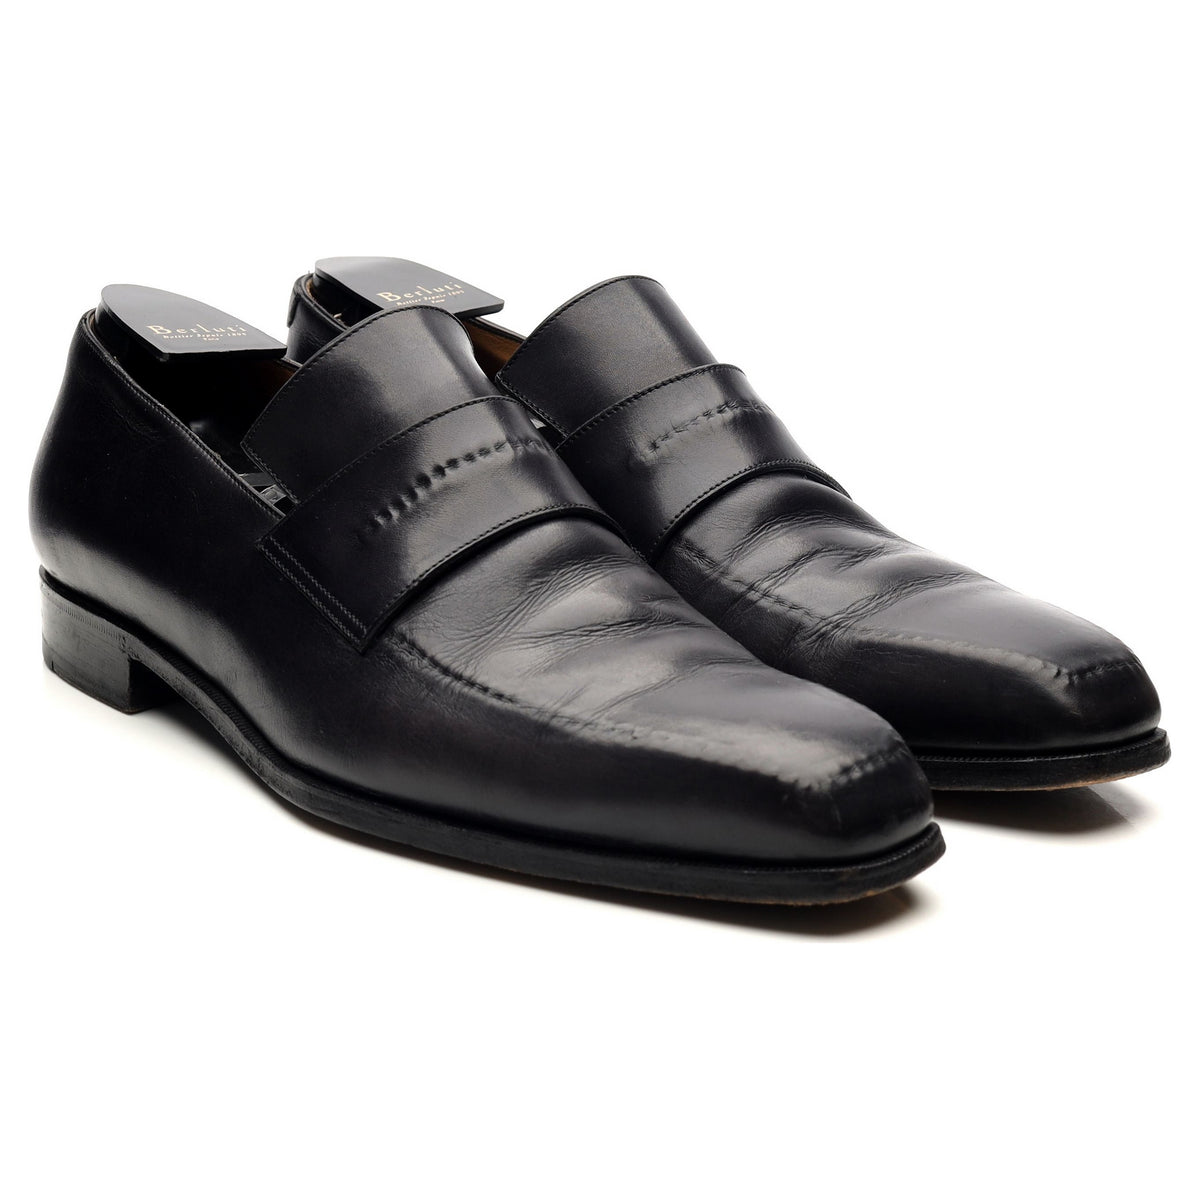 Black Leather Loafers UK 10